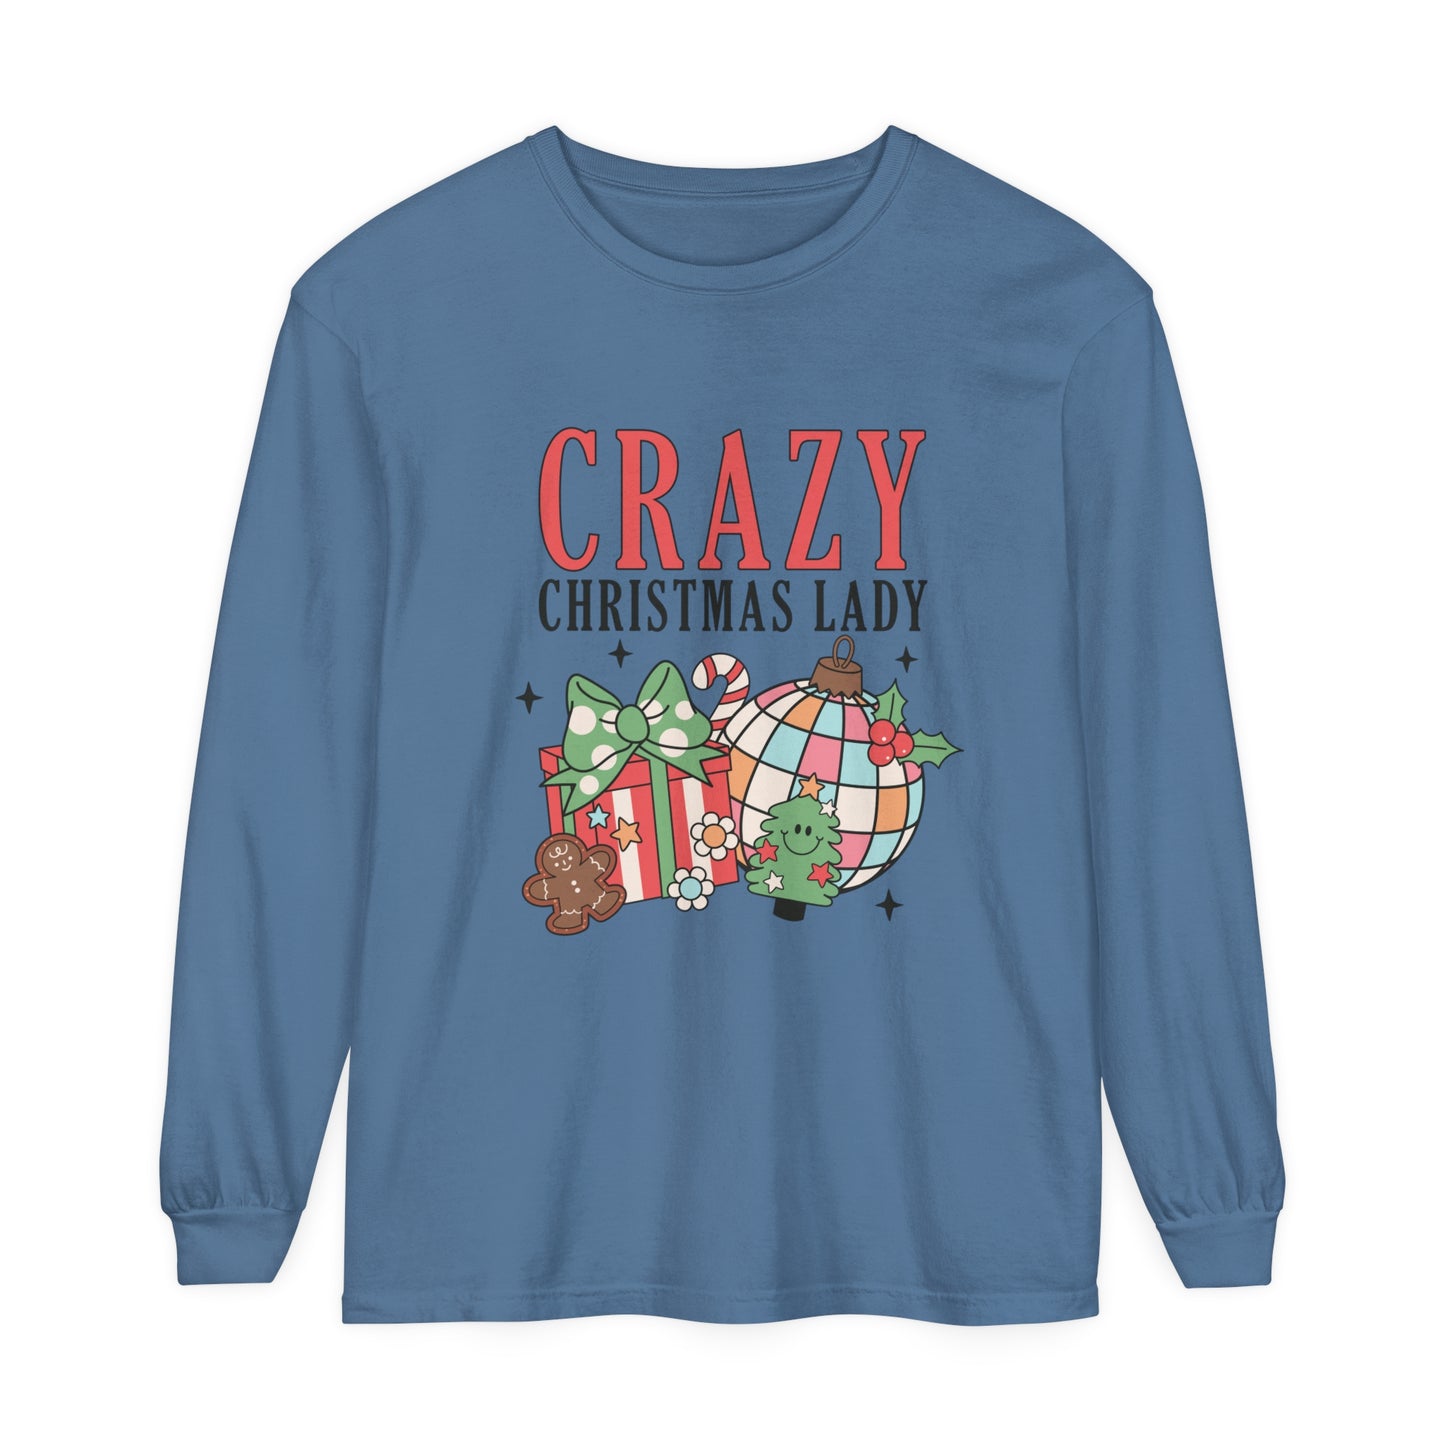 Crazy Christmas Lady Women's Christmas Holiday Loose Long Sleeve T-Shirt